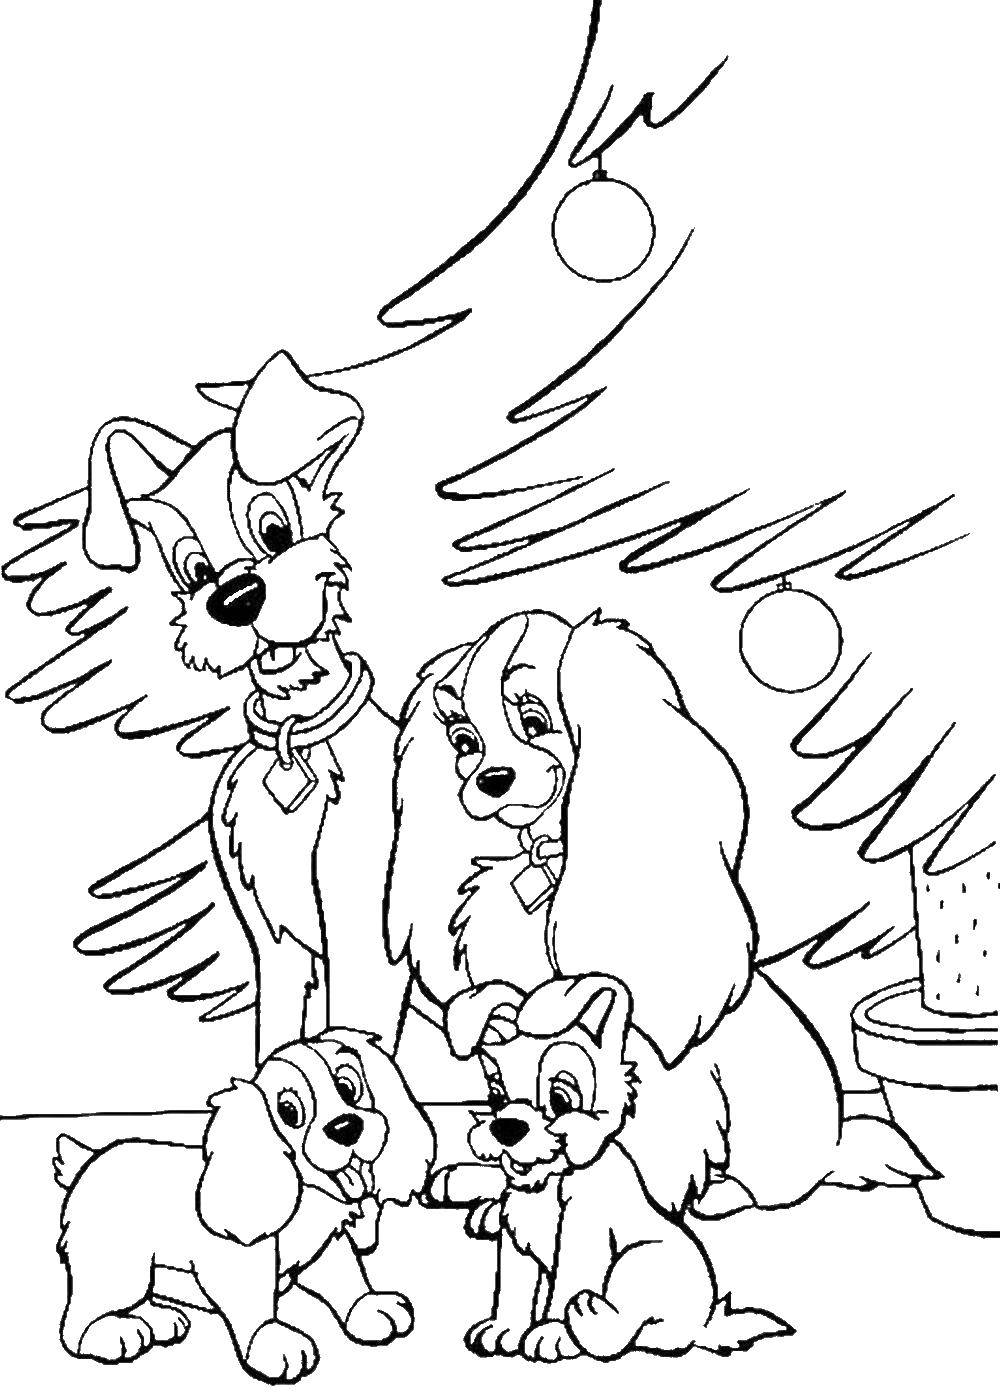 Coloring Disney characters. Category Disney coloring pages. Tags:  Cartoon character, Disney.